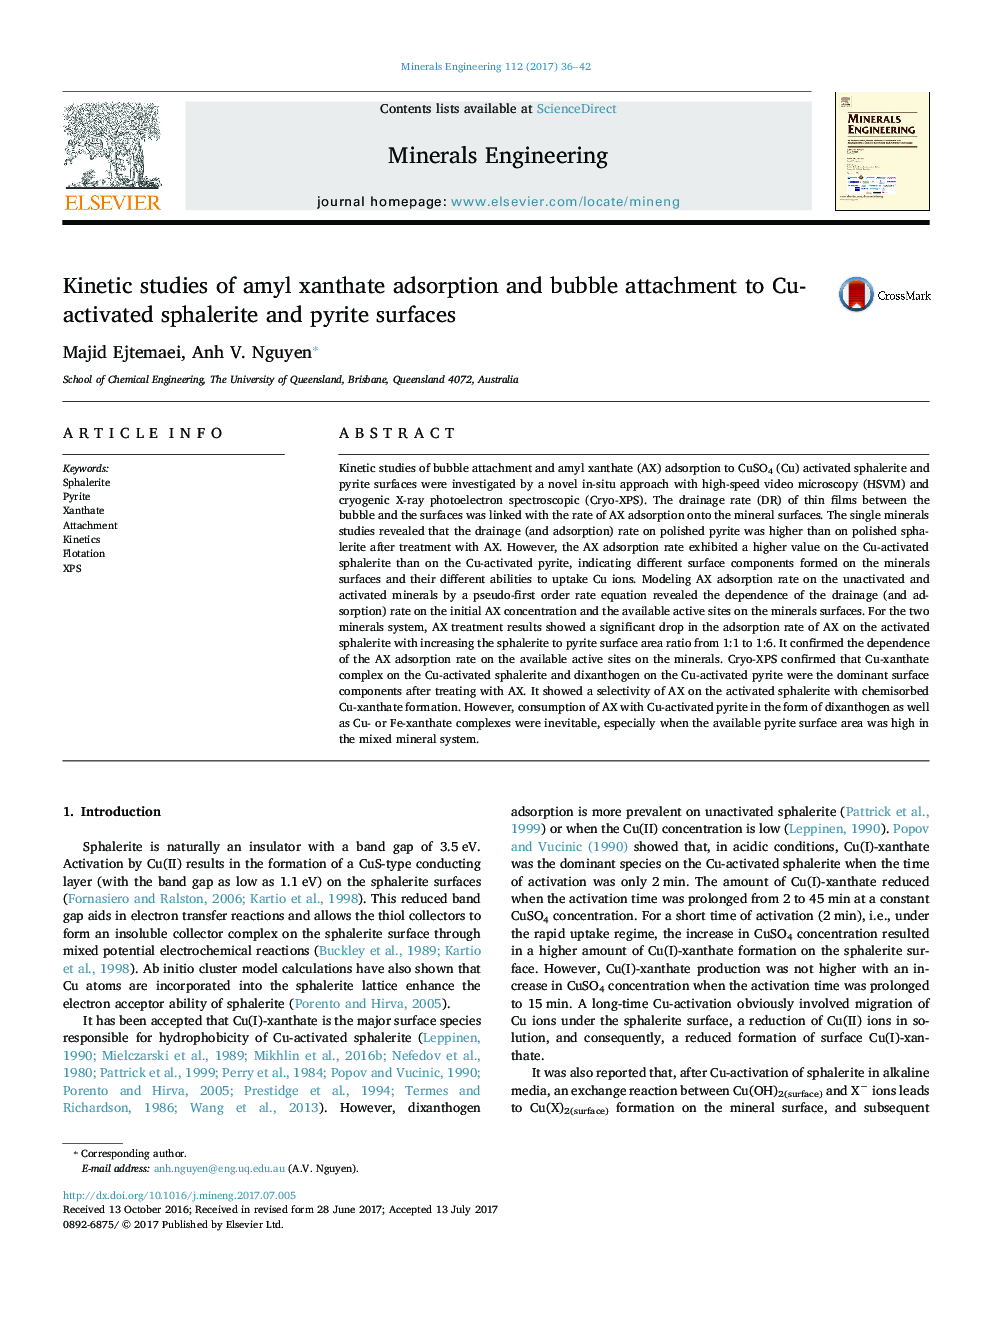 Kinetic studies of amyl xanthate adsorption and bubble attachment to Cu-activated sphalerite and pyrite surfaces